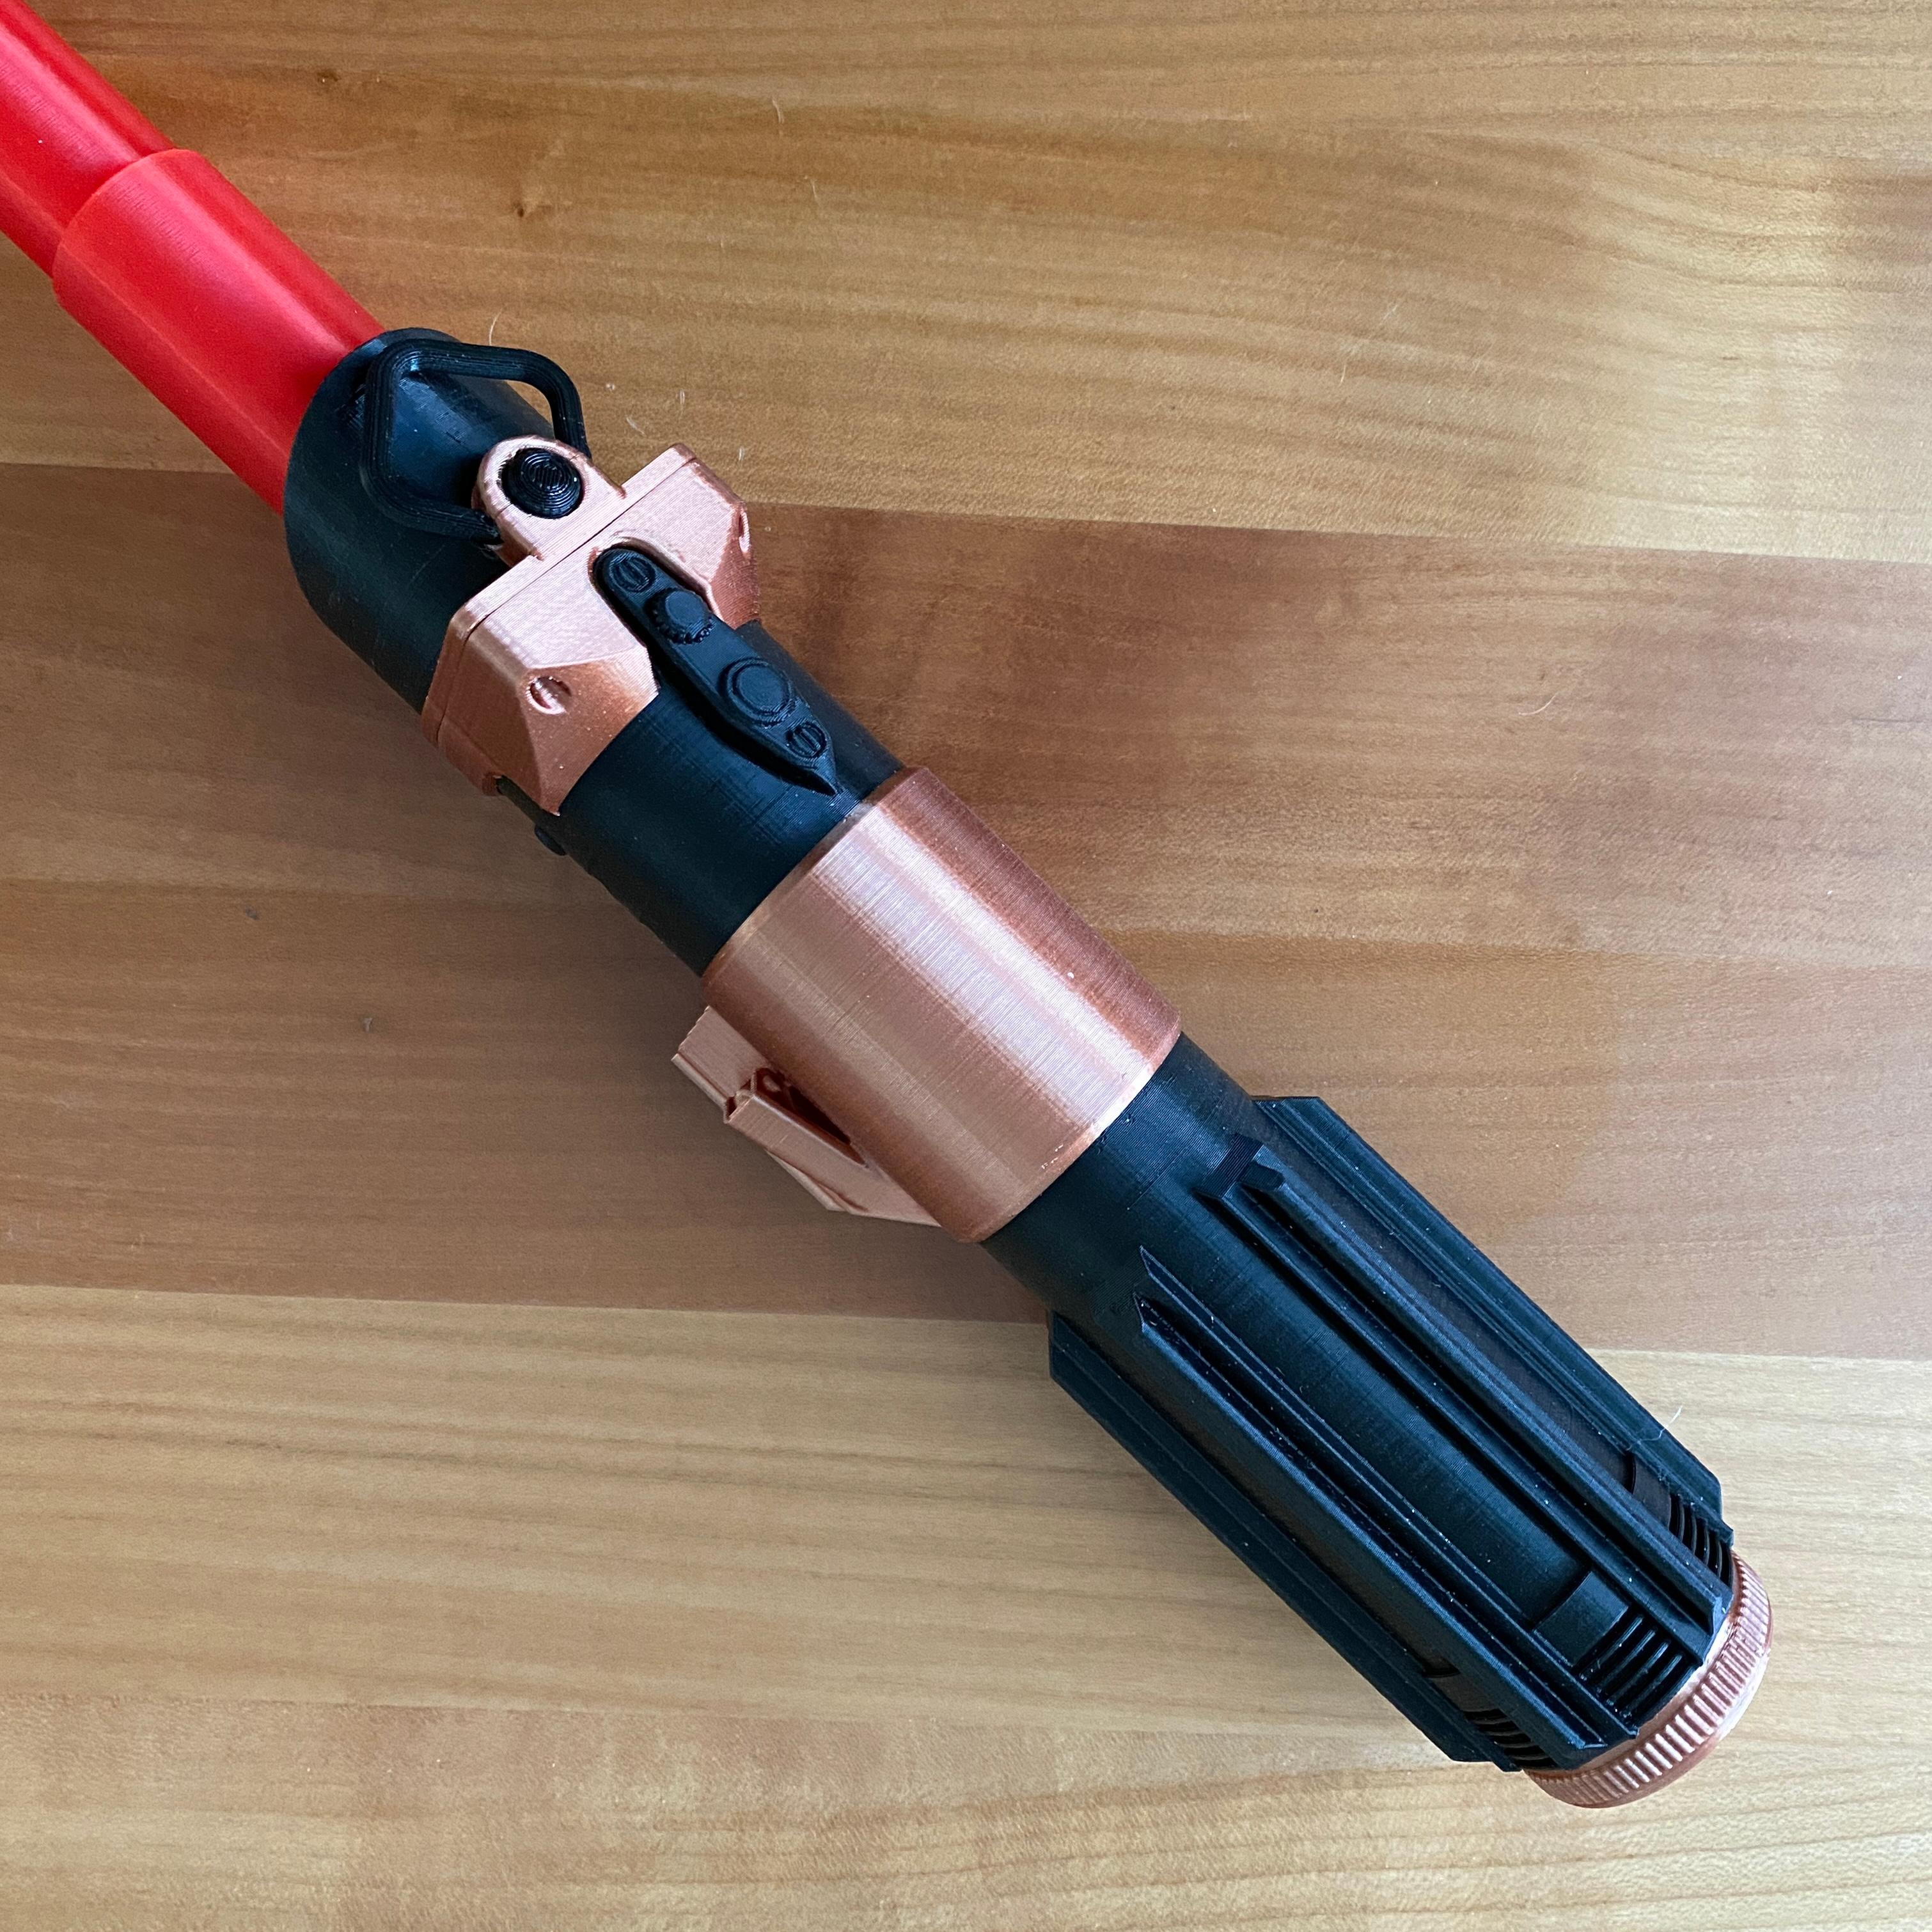 Collapsing Sith Lightsaber - Tried a color variation - came out great! - 3d model